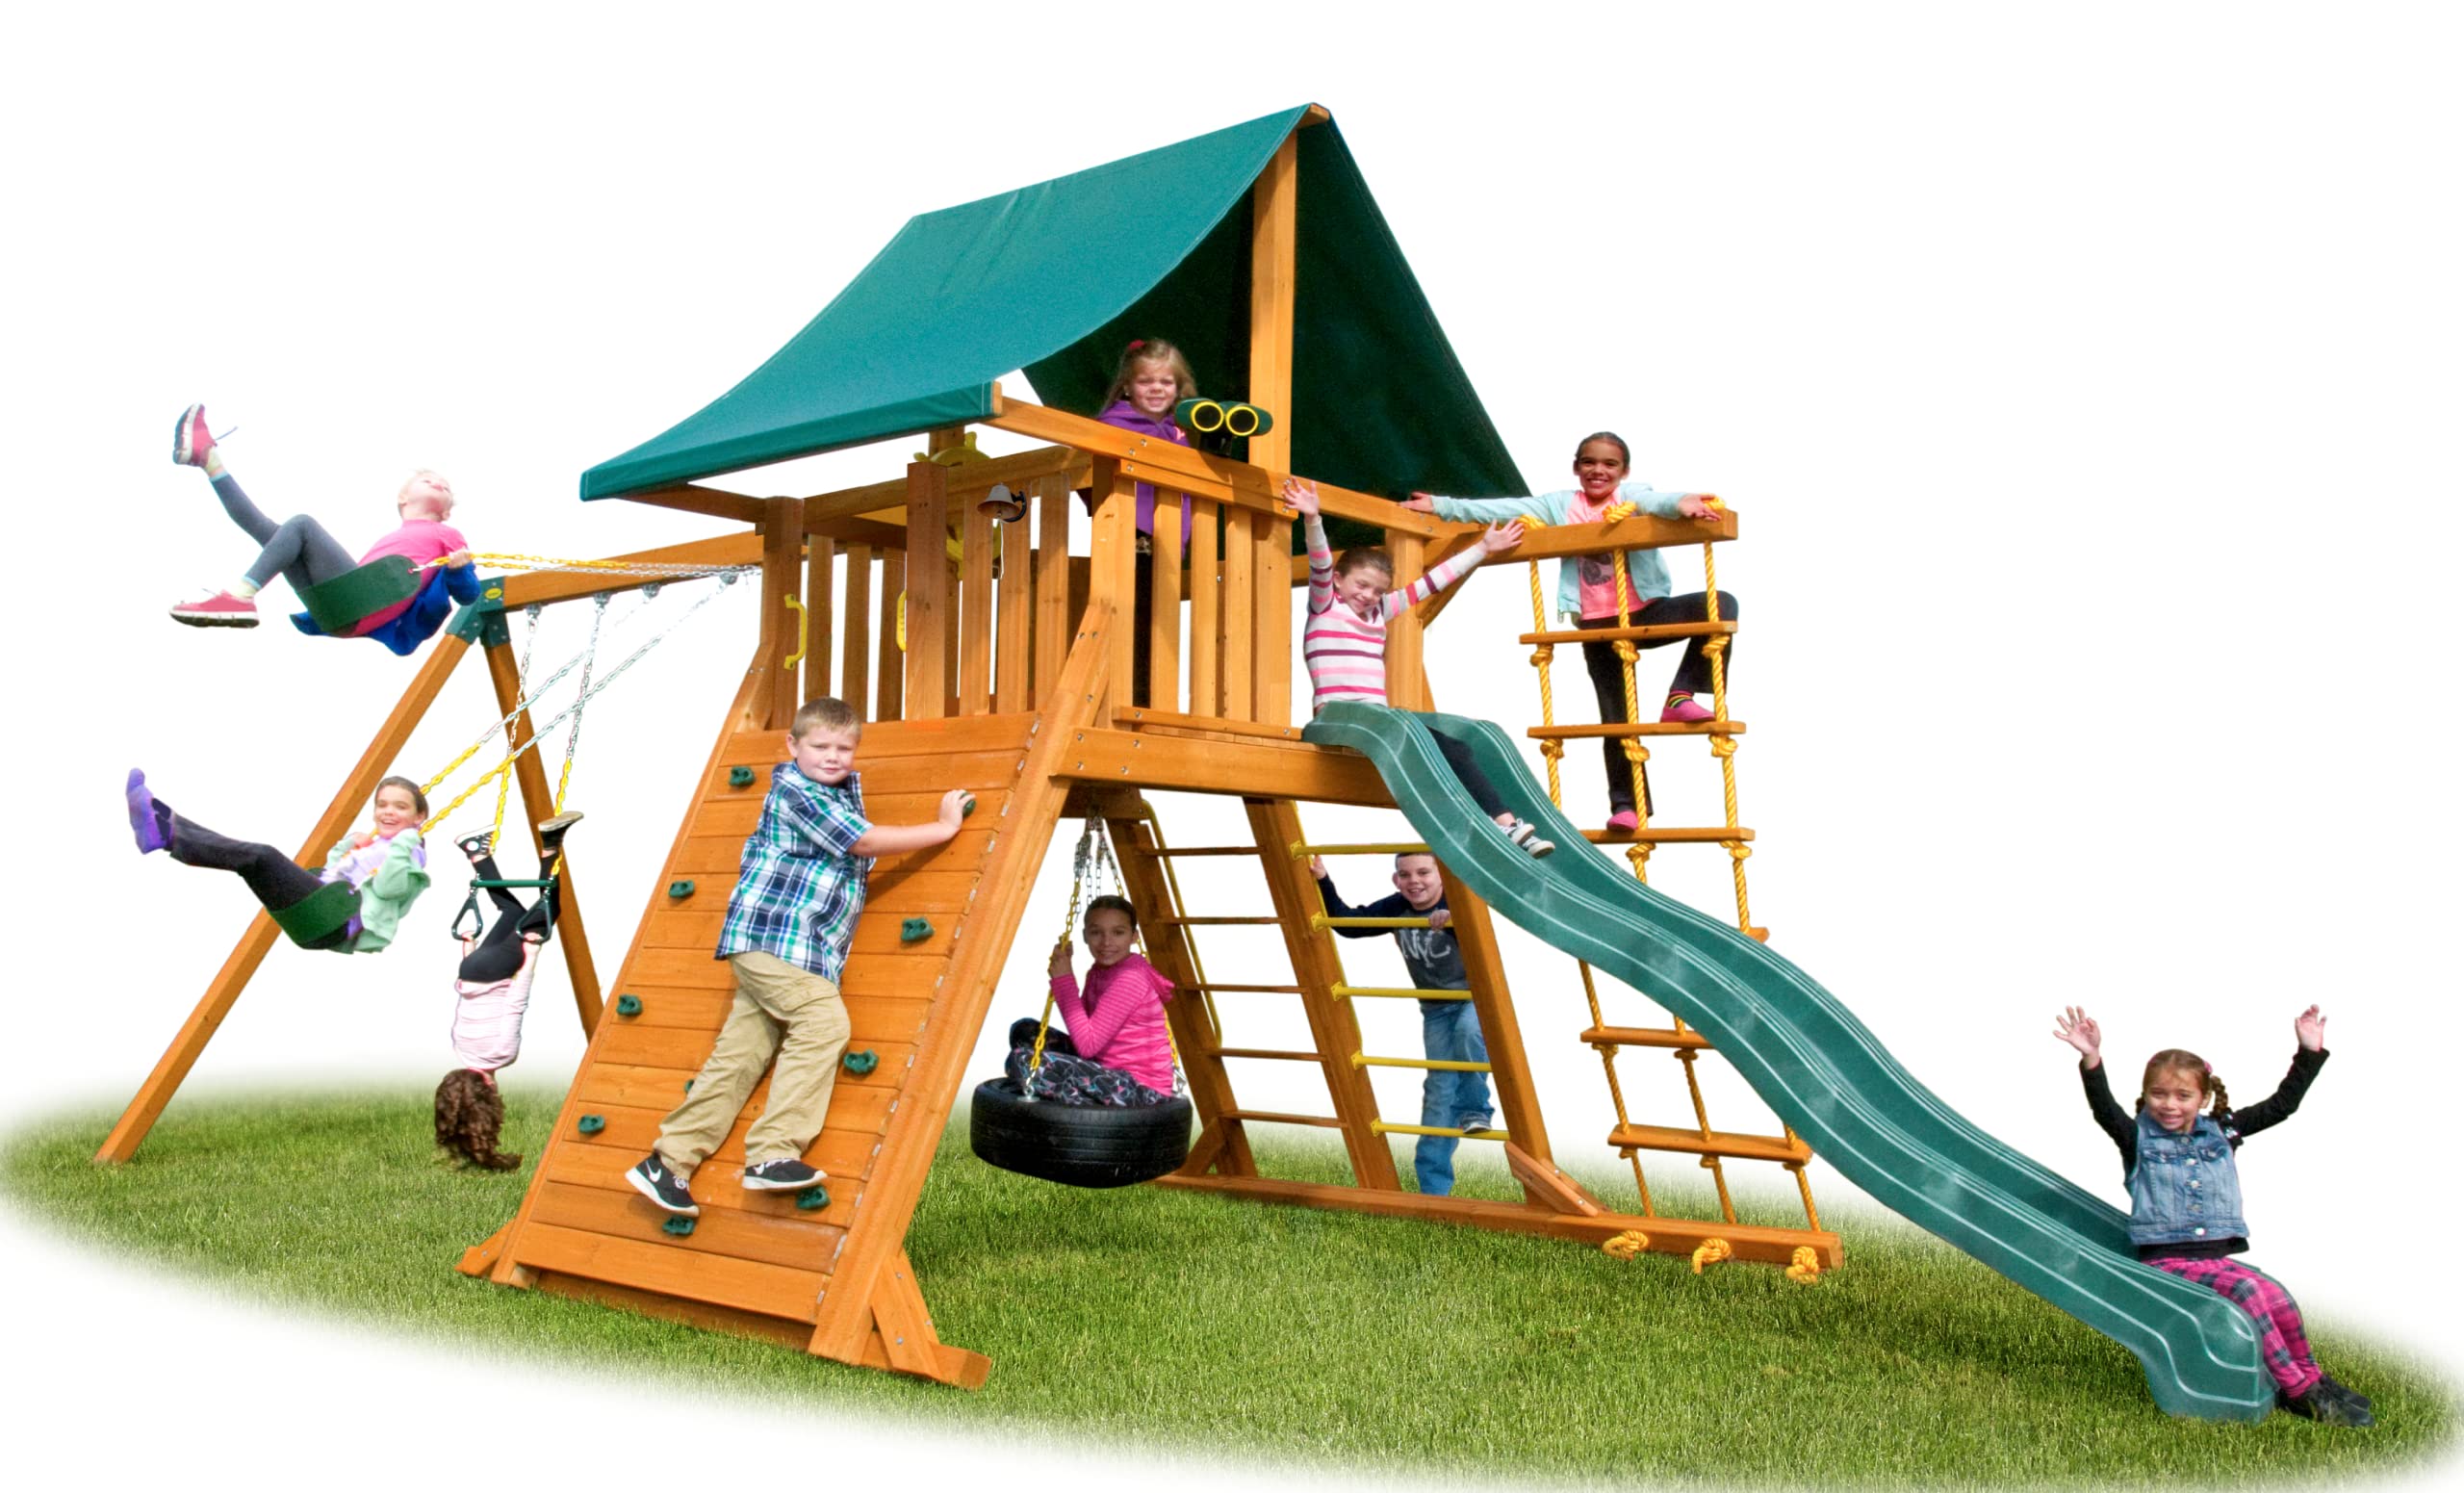 Supreme Swing Set - Solid Cedar Jungle Gym | Large Tower, Rock Climbing Wall, Wave Slide, Tire Swing, Swings Accessories | 25’ x 10’ Kids Playhouse | Easy Assembly and Pre-Assembled Components (#1)